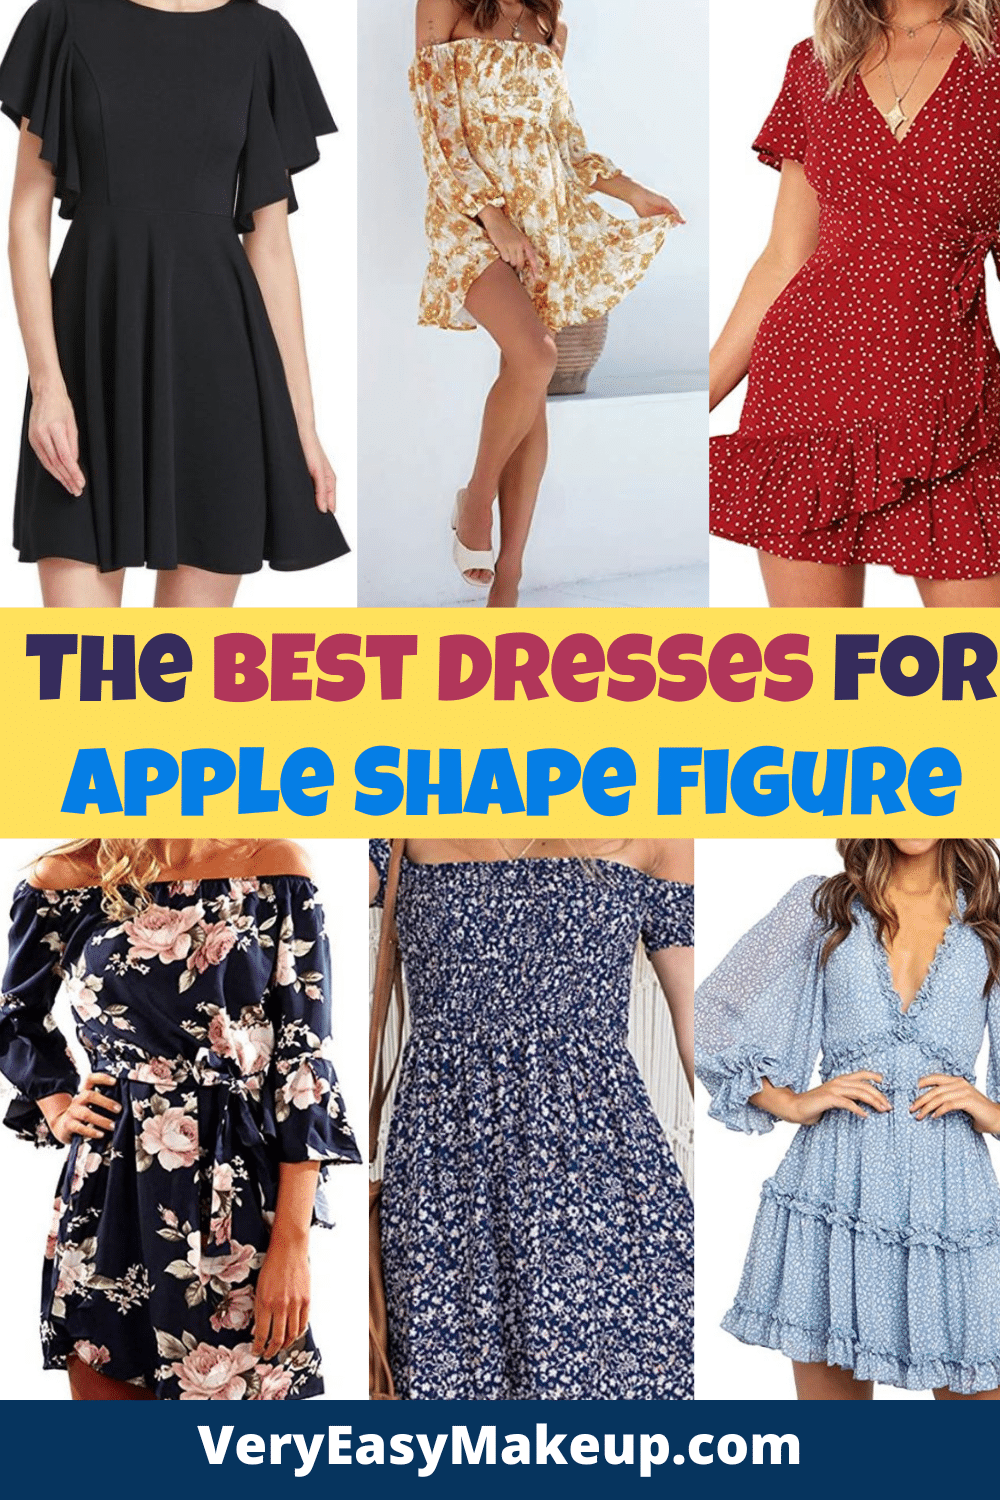 The Best Dresses for Apple Shape Figure by Very Easy Makeup